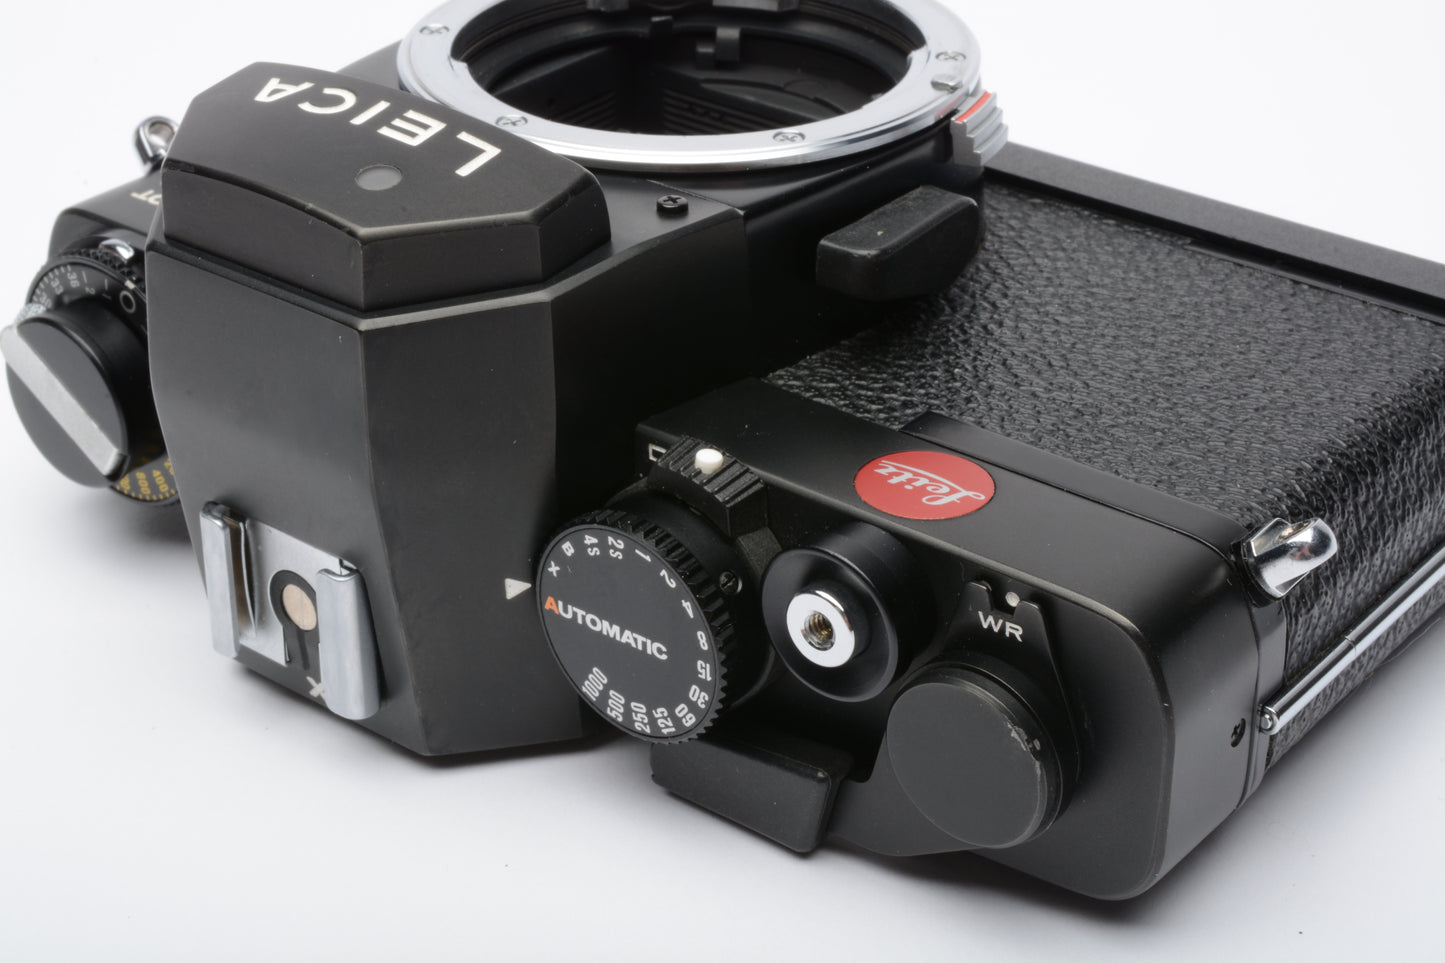 Leica R3 MOT Electronic 35mm SLR body (Black), tested, accurate, clean, strap, cap, cover